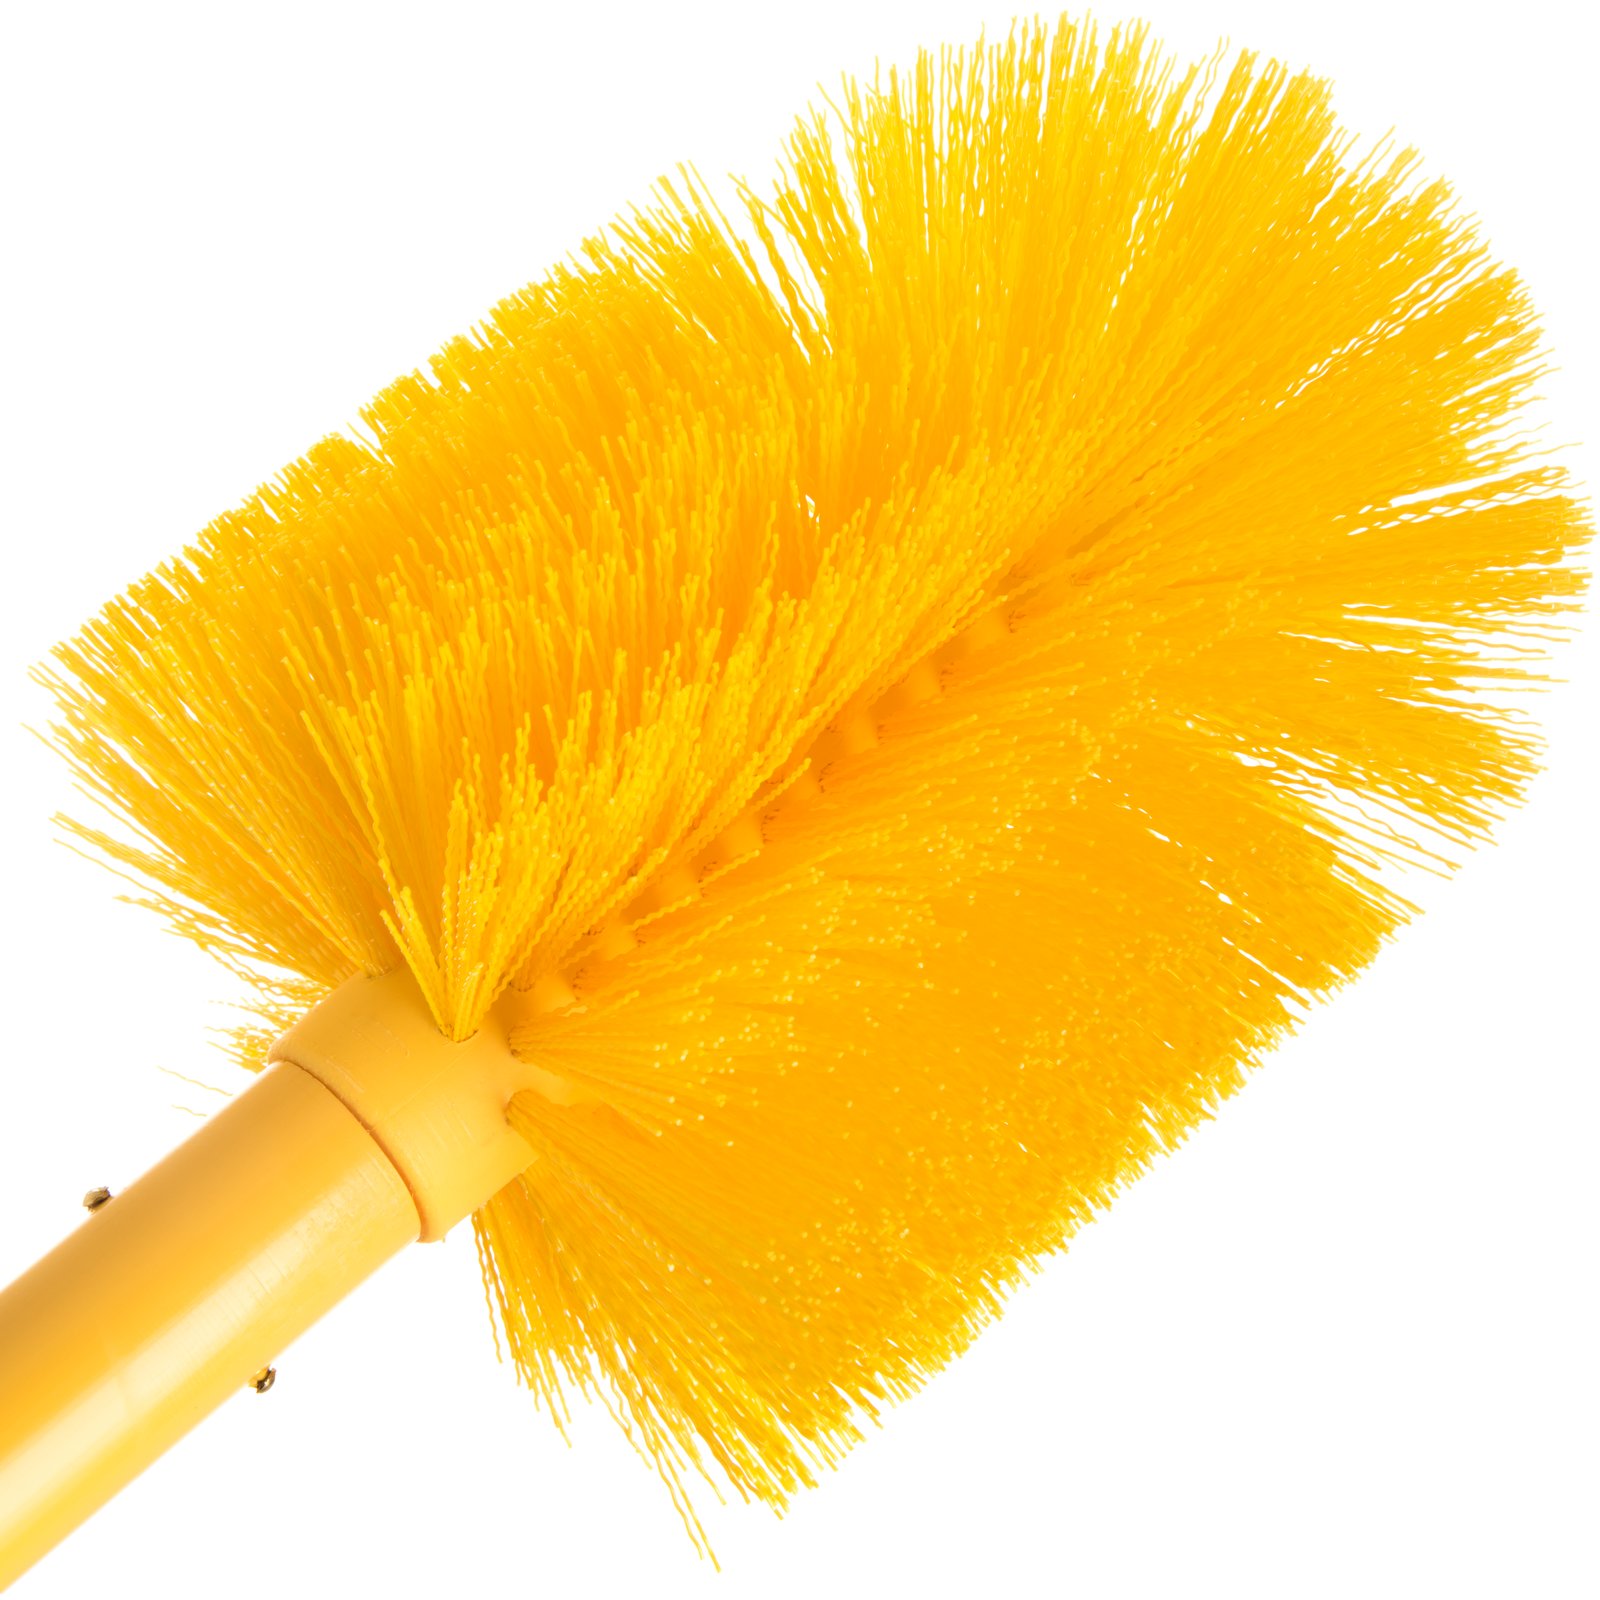 Made in USA - Cleaning & Finishing Brush, Brass - 09301987 - MSC